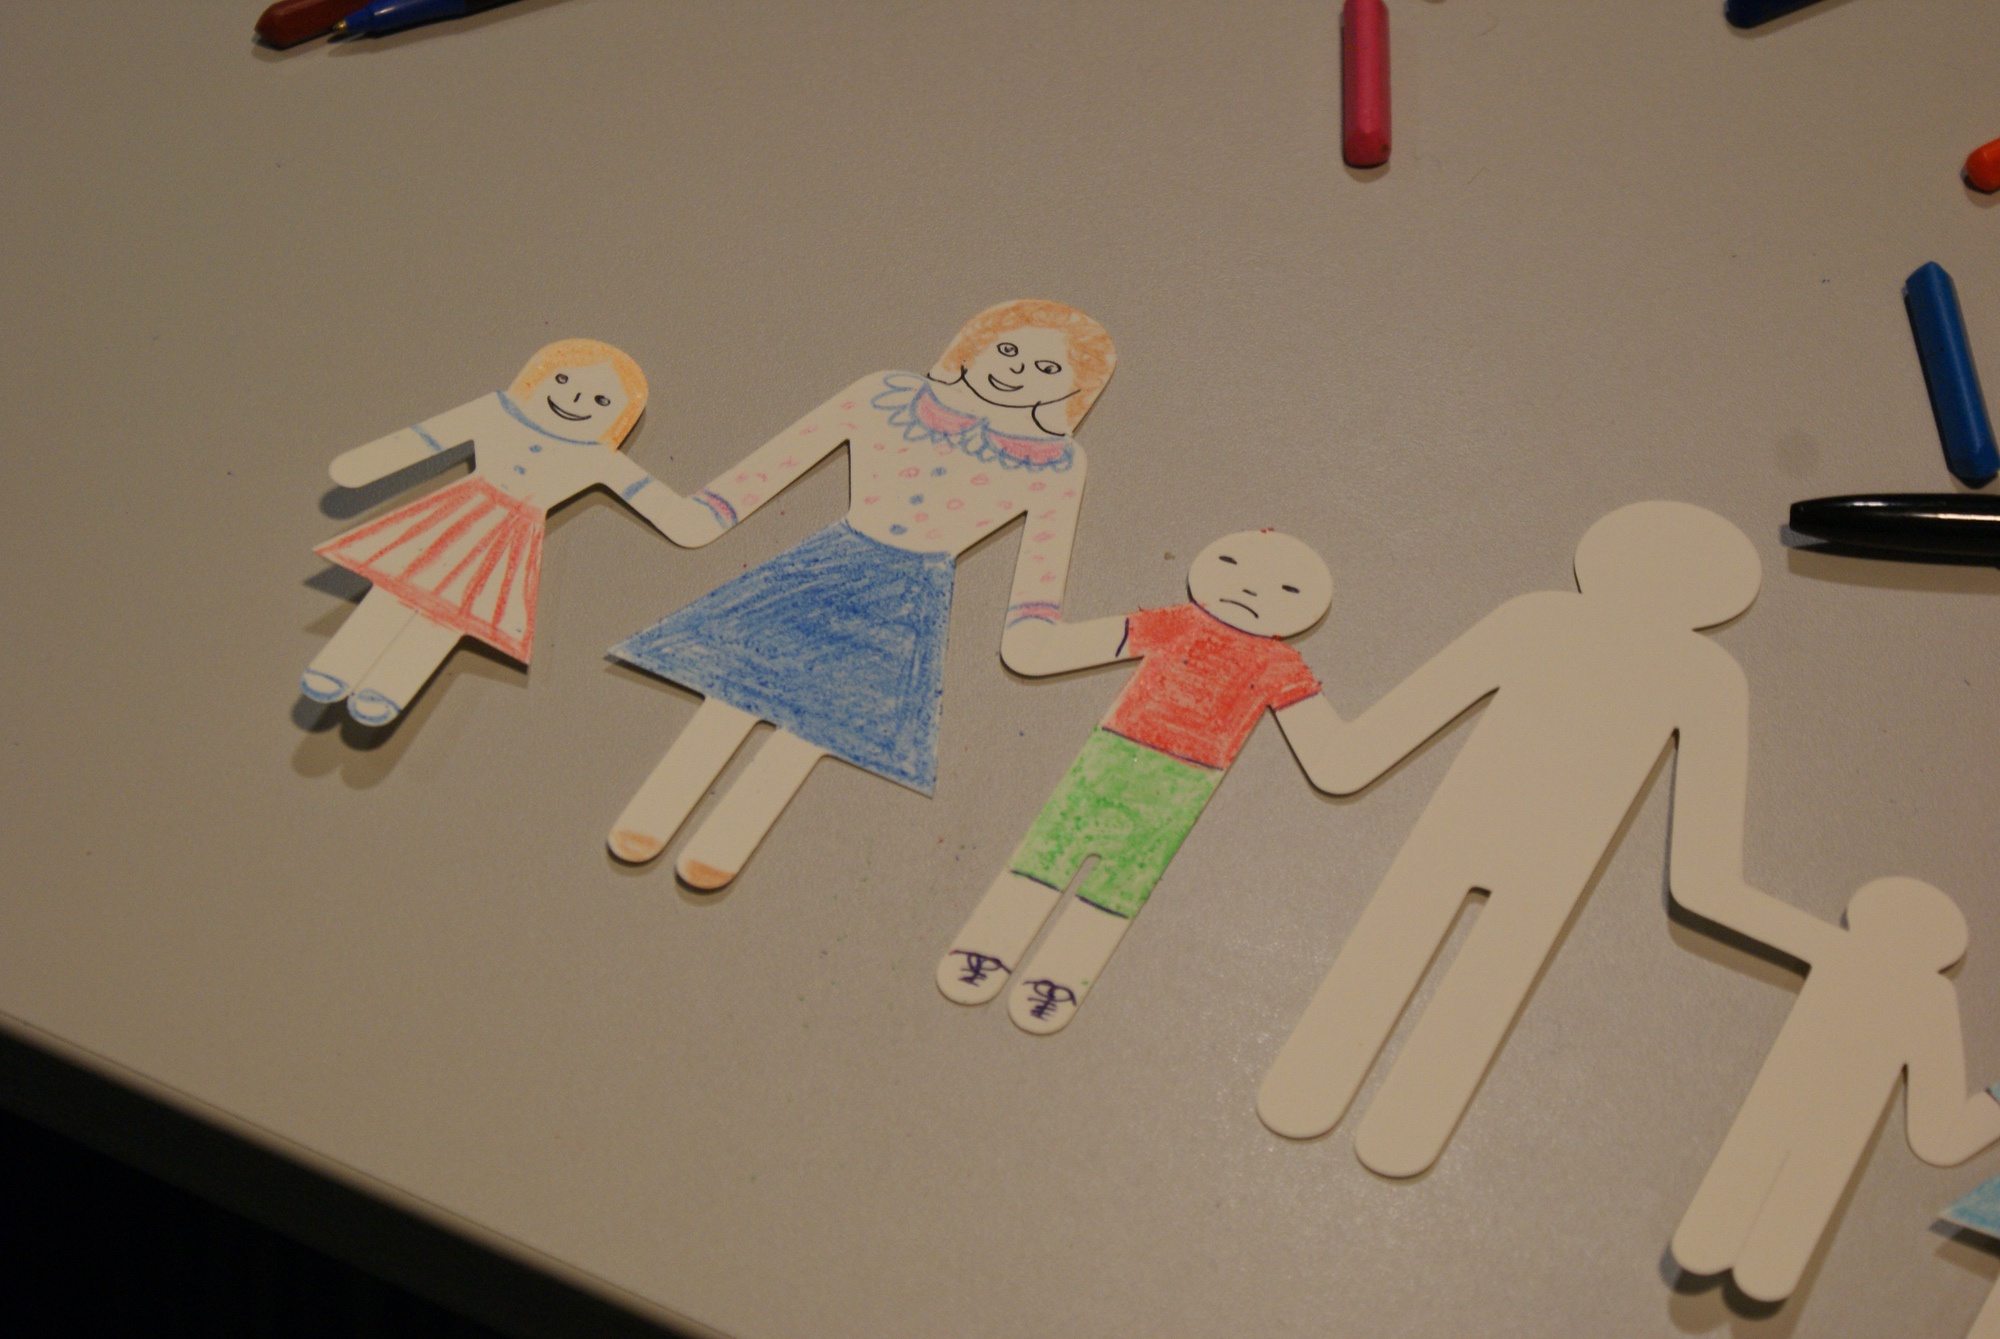 Cut out paper dolls coloured in to show a mother and two children lay on a table.